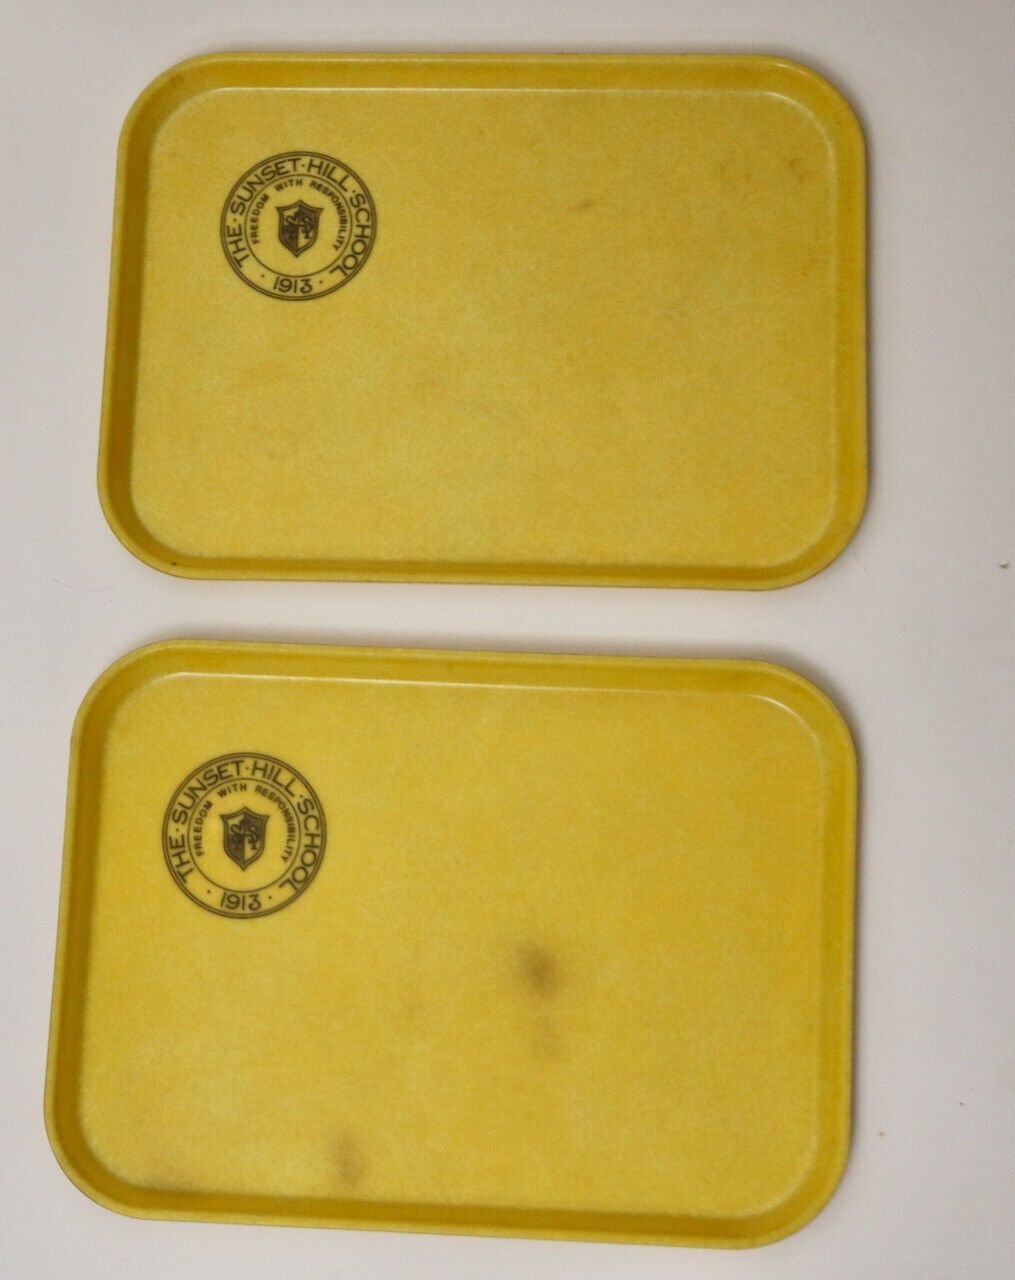 SUNSET HILLS SCHOOL vintage set of 2 Camtray school lunch trays